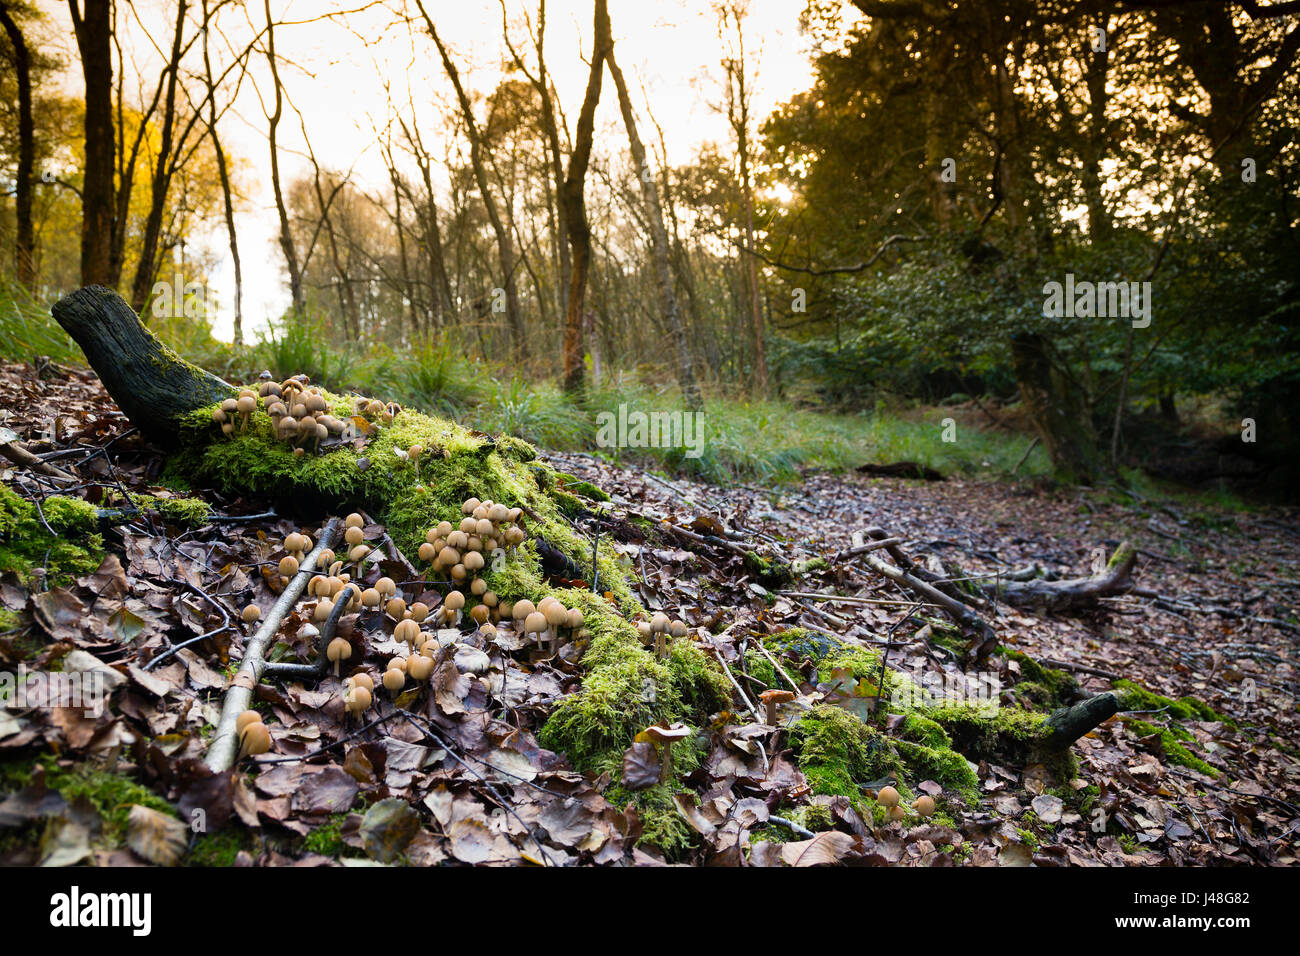 Ashdown forest, UK. Mushrooms growing on the floor of Ashdown Forest in late afternoon light. Stock Photo